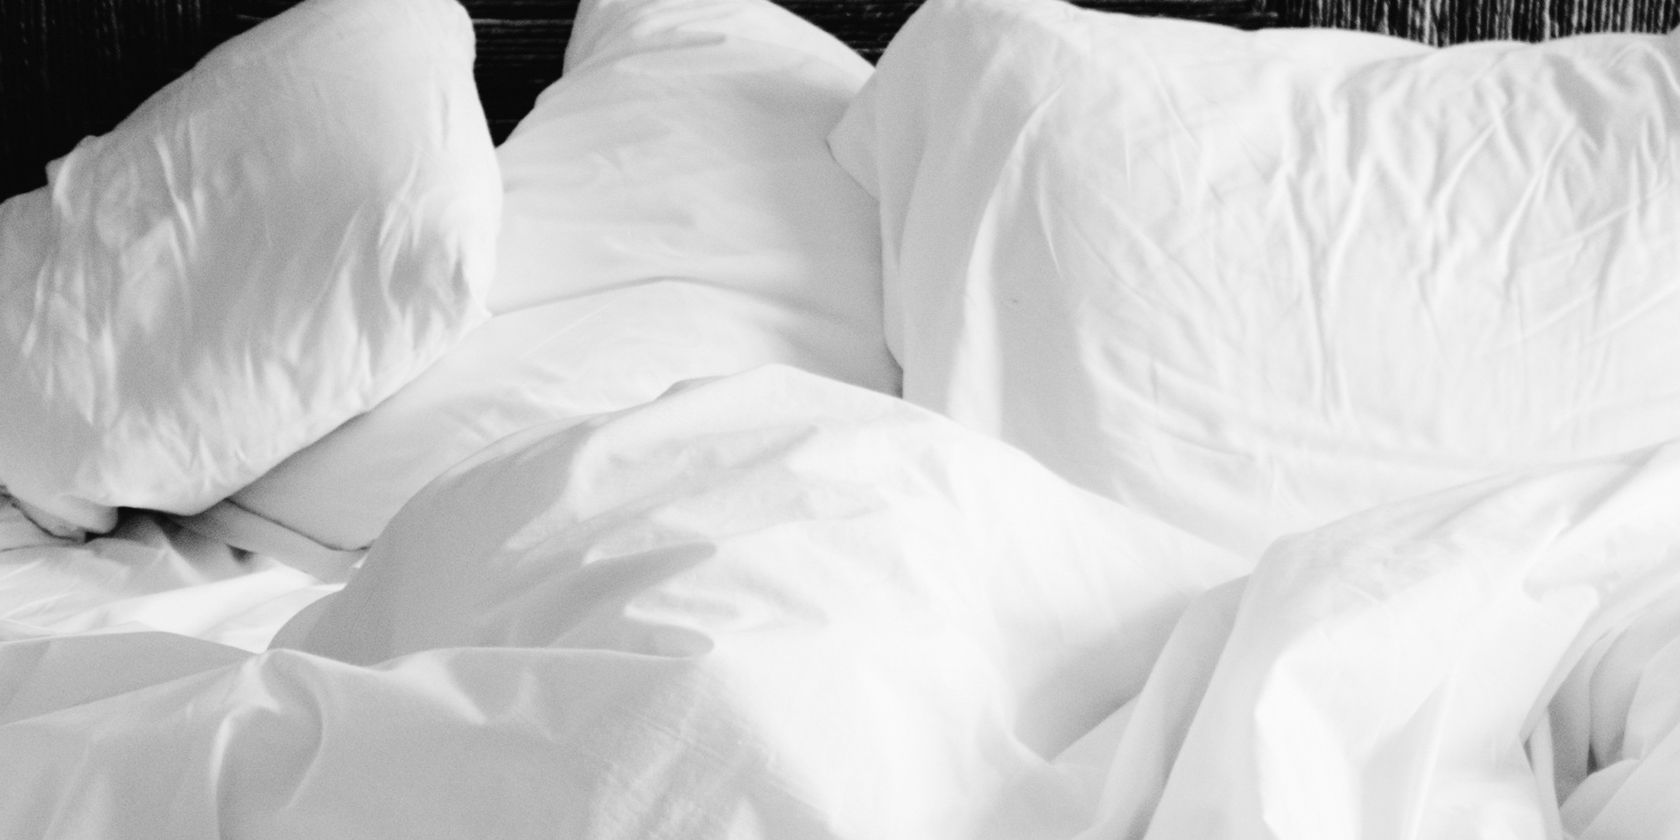 Fluffly white pillows strewn across a messy bed.